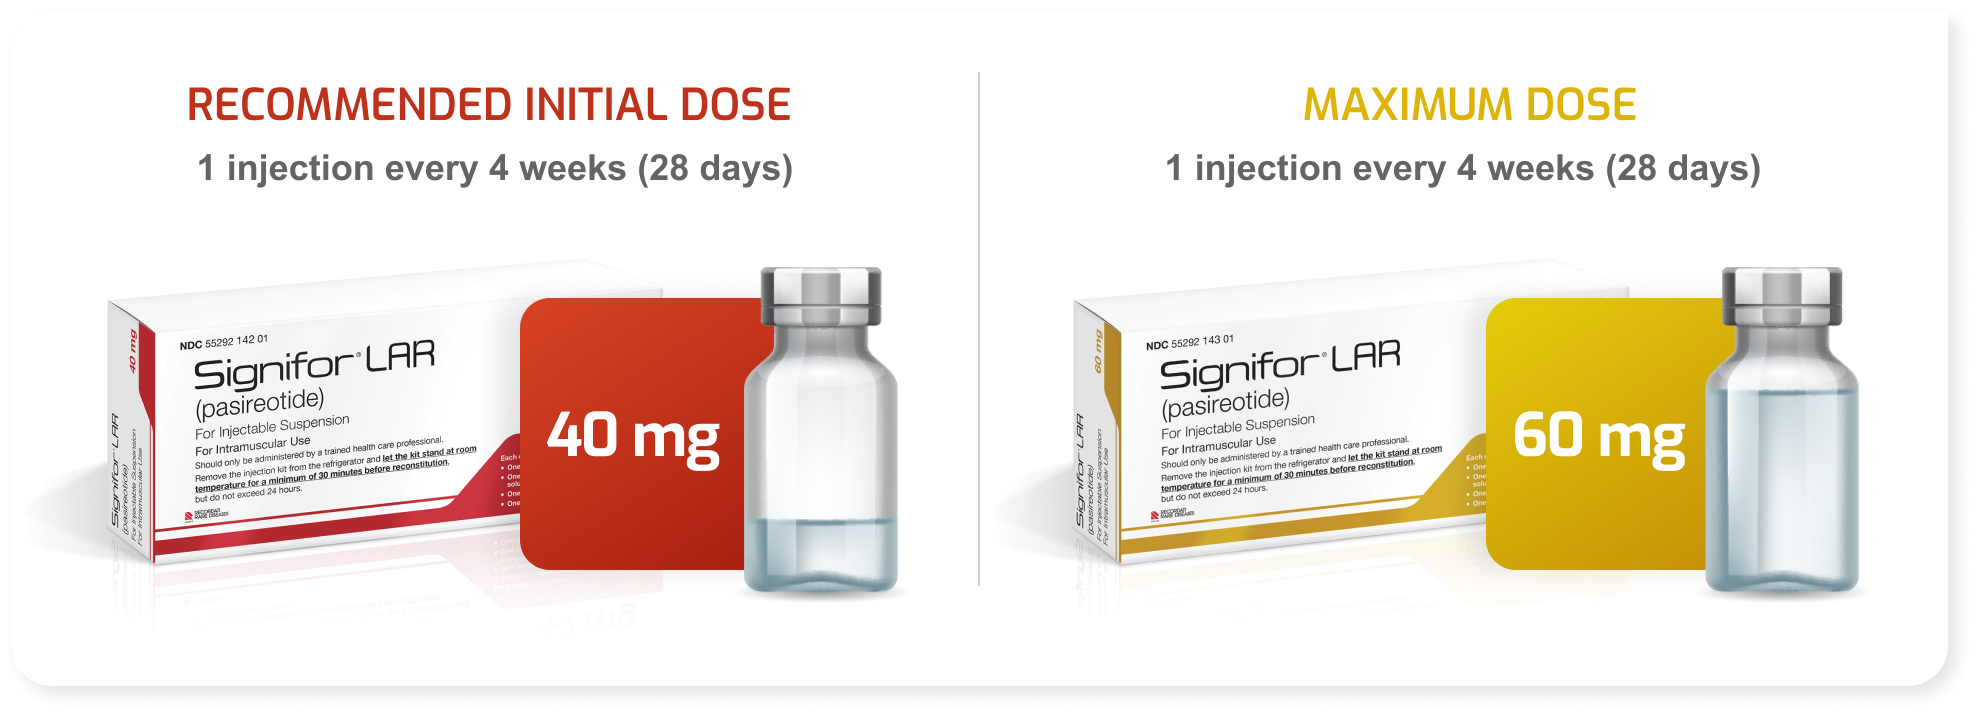 Recommended initial dose and maximum dose product images